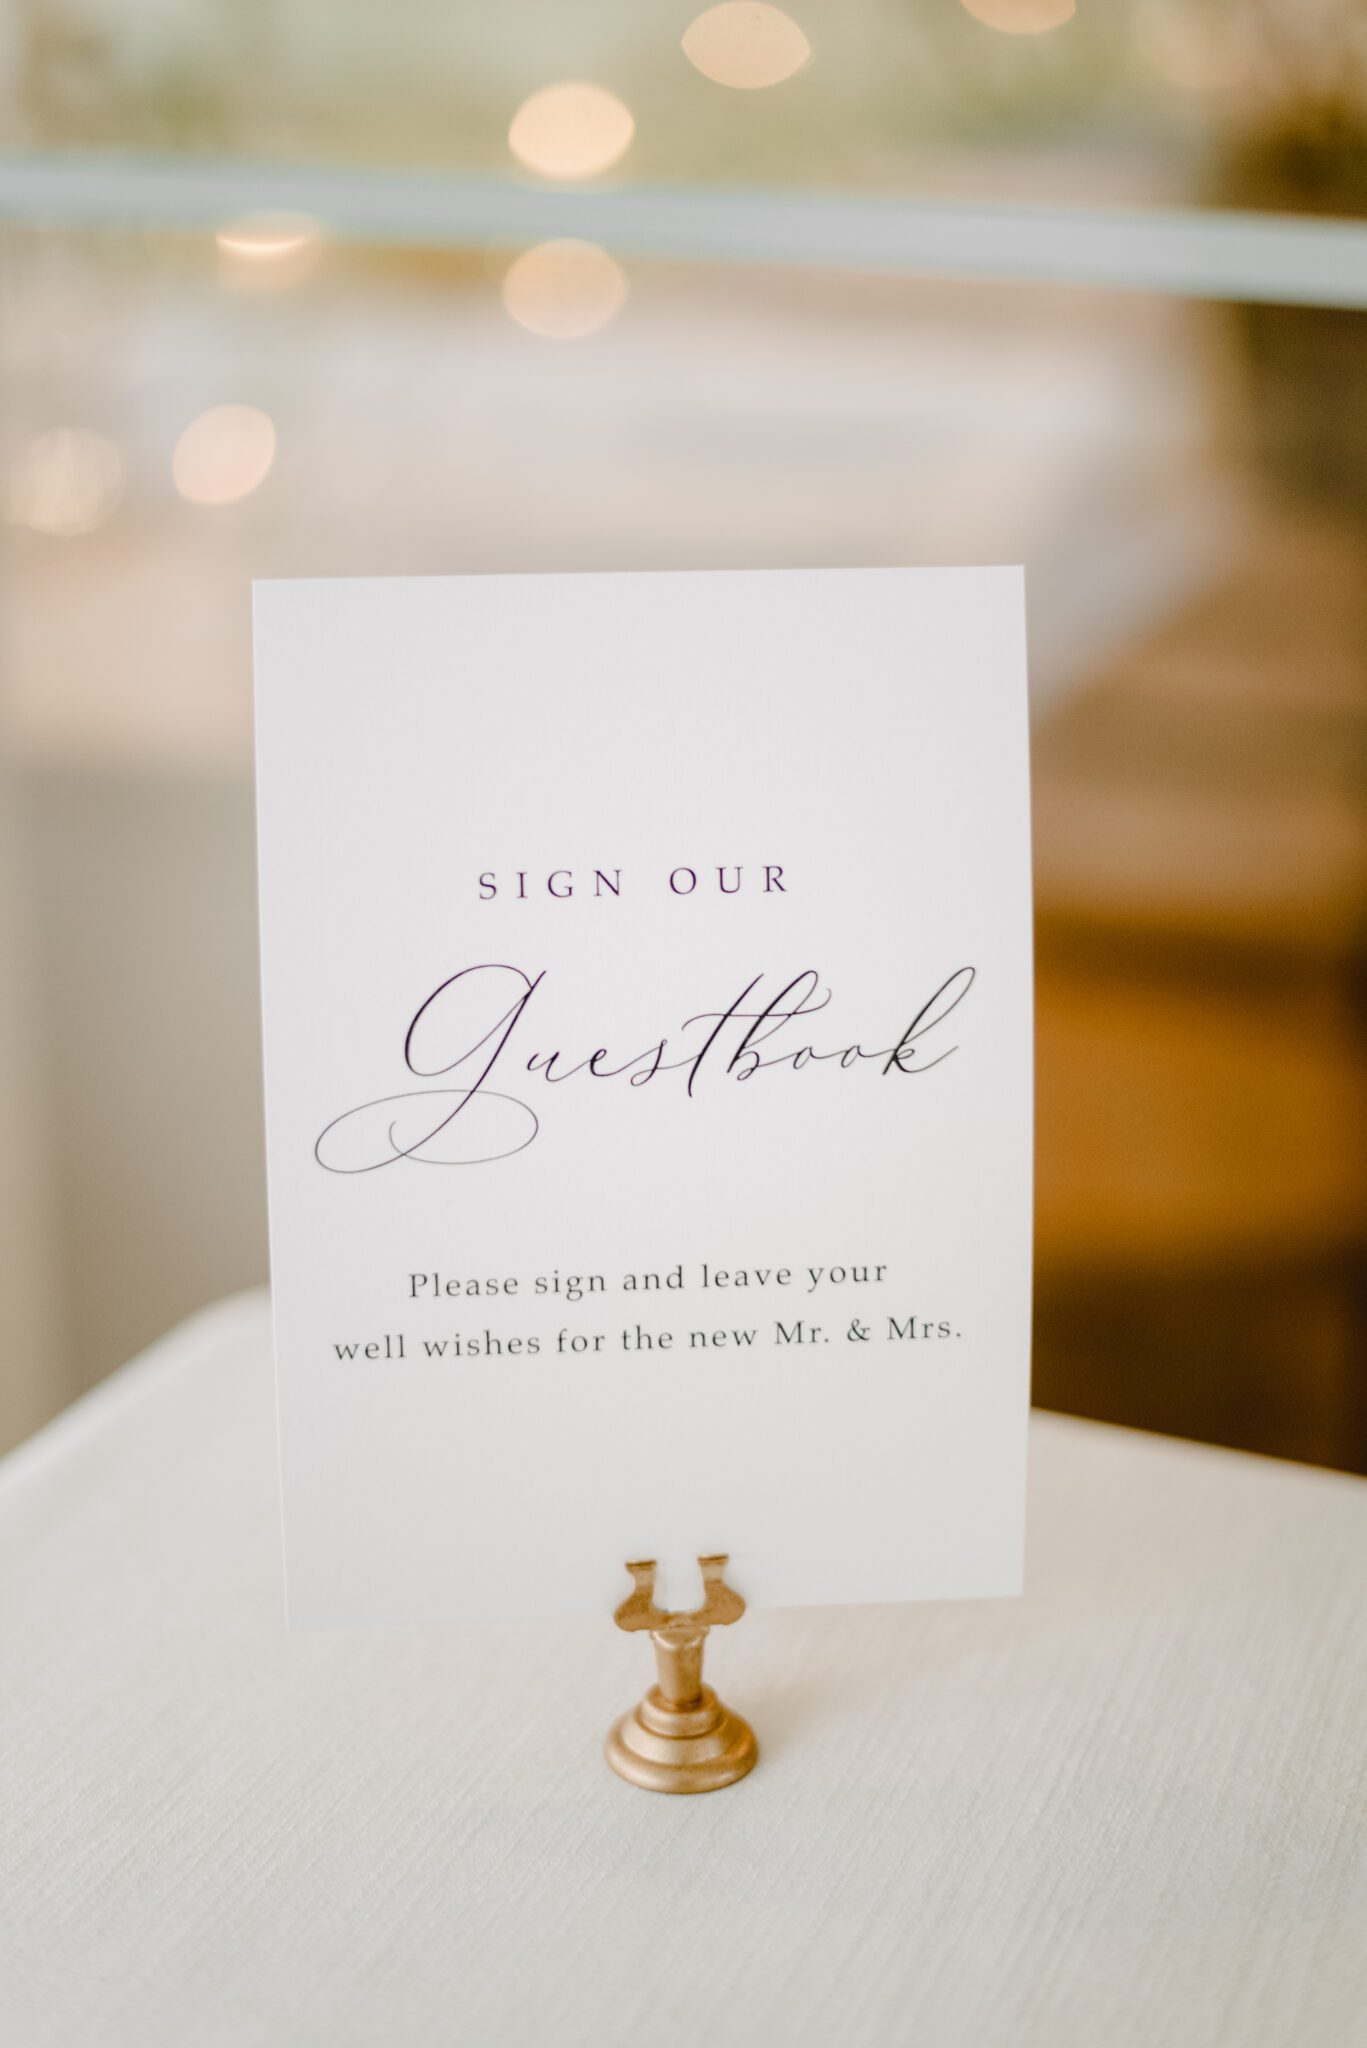 White and gold wedding reception guestbook sign. Elegant summer wedding reception at Sparrow Lane Events in Alberta. Summer wedding features white roses, greenery blush decor accents and warm wood tones.